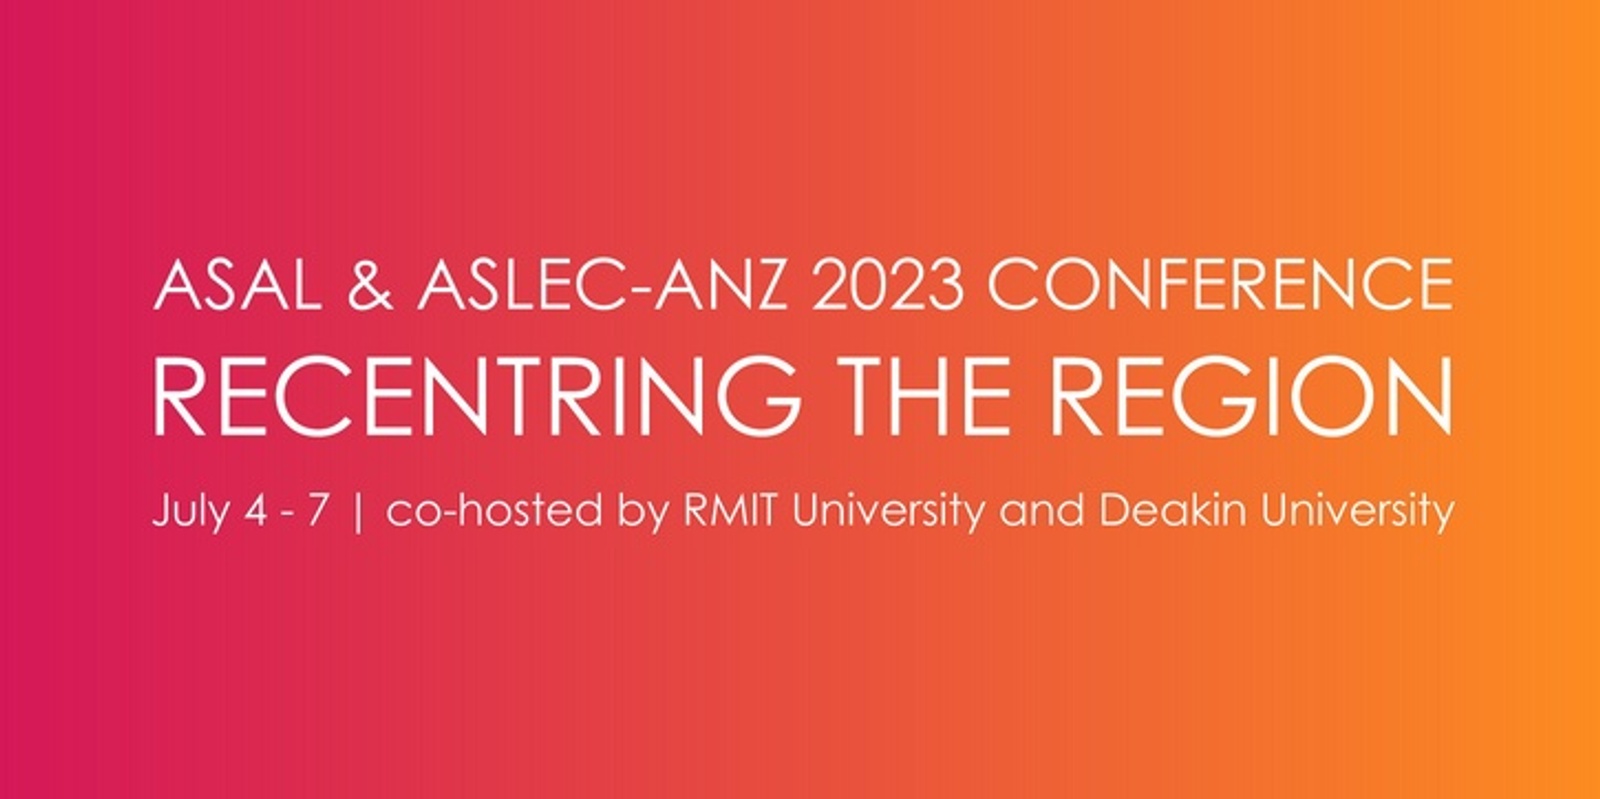 ASAL & ASLEC-ANZ 2023 Conference ‘Recentring the Region’ 